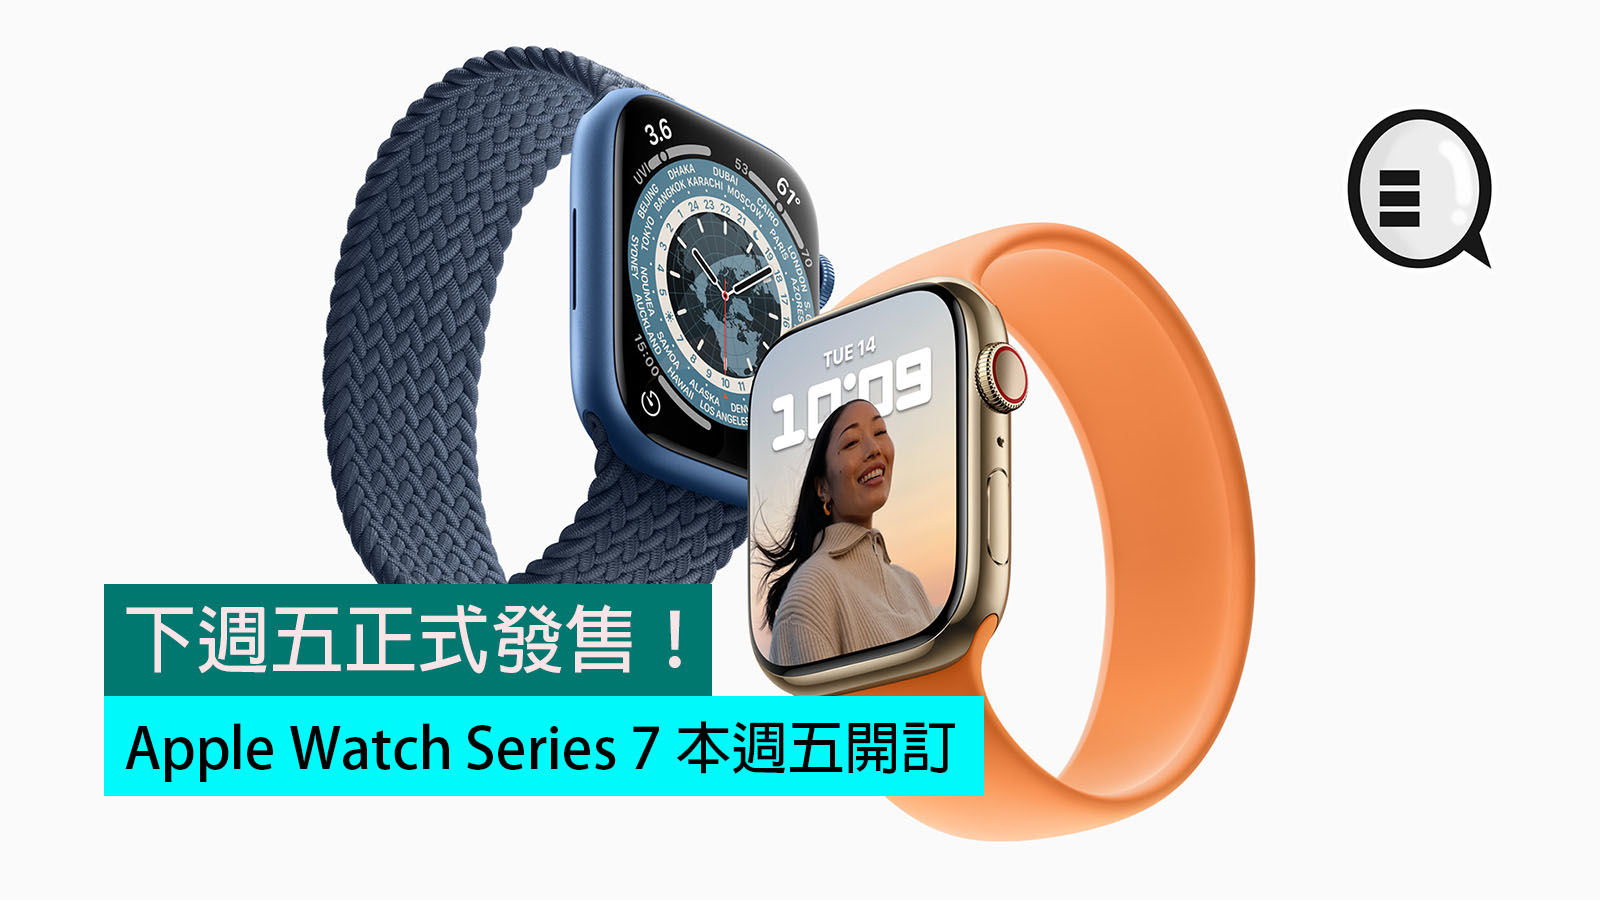 Apple Watch Series 7 will be available for subscription this Friday and will go on sale next Friday! thumbnail